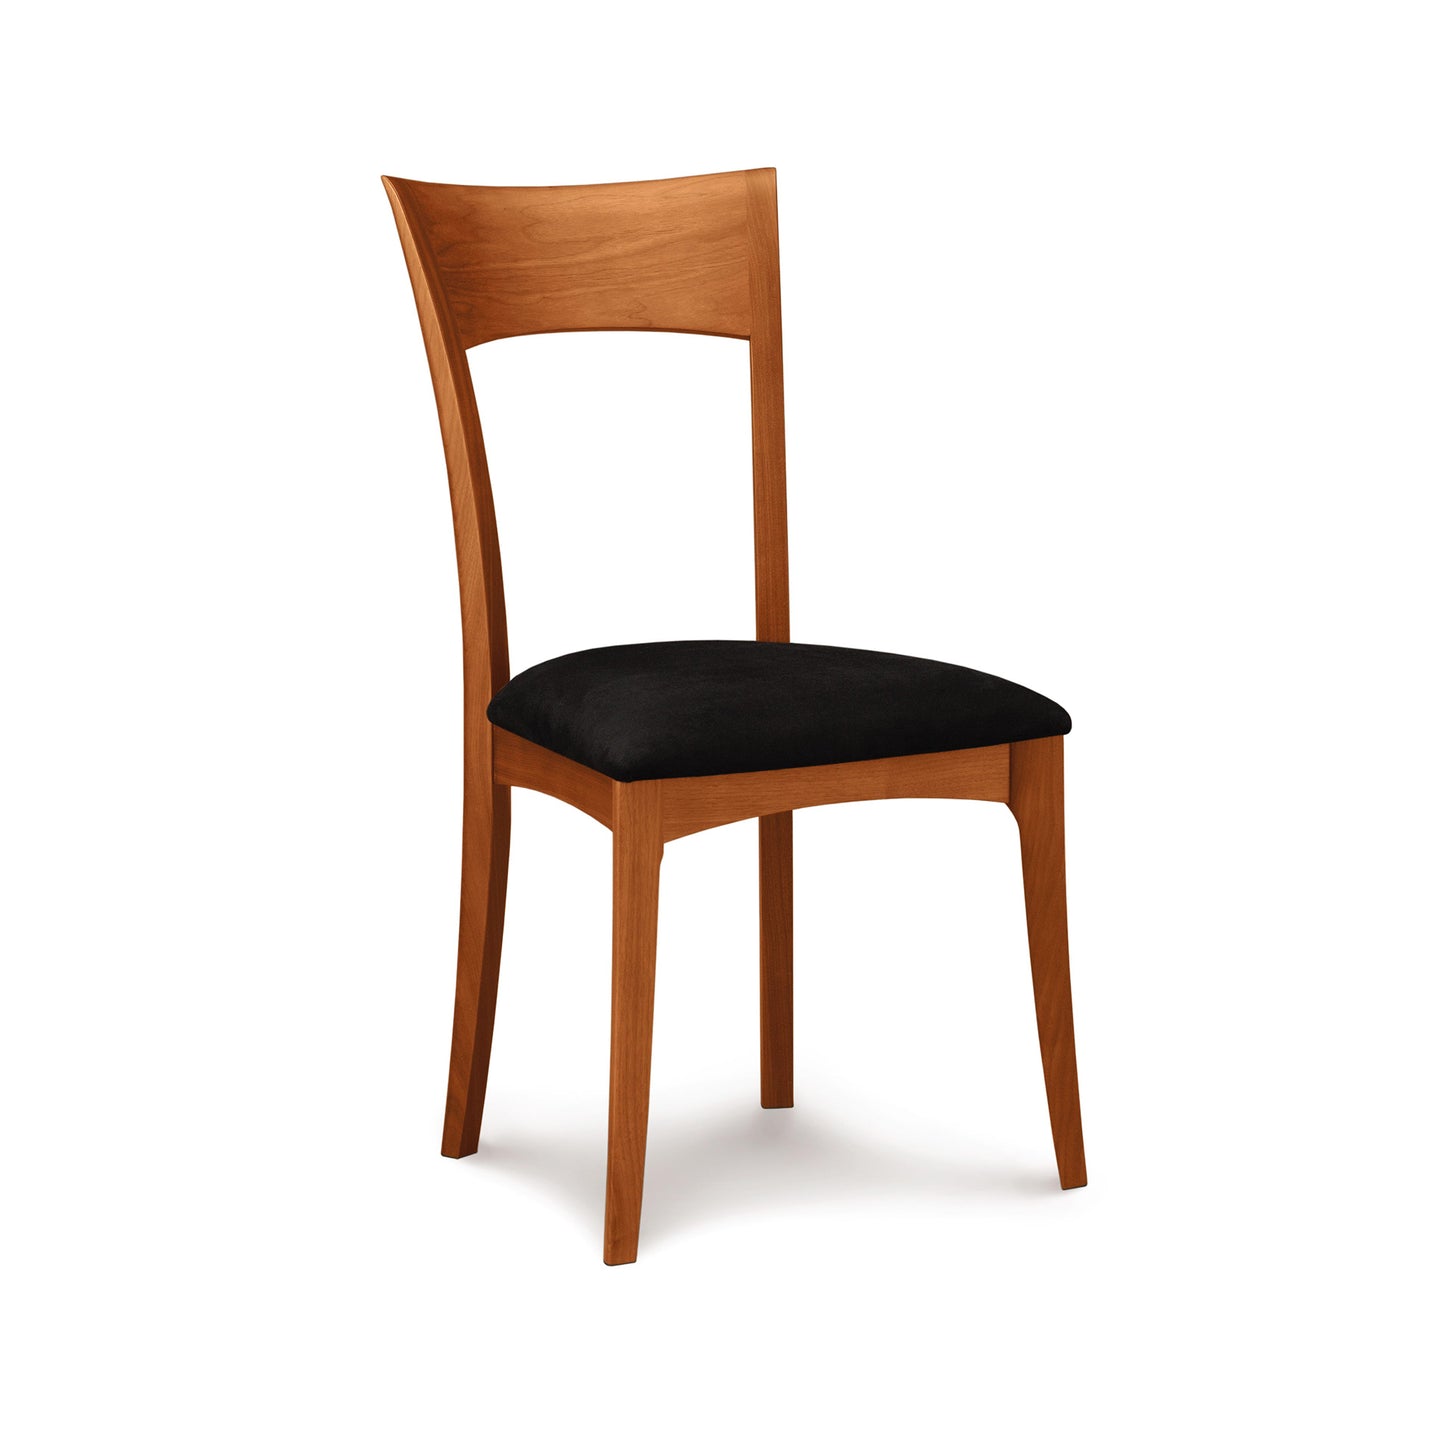 A solid American cherry wood Ingrid Chair by Copeland Furniture with a black upholstered seat on a white background.